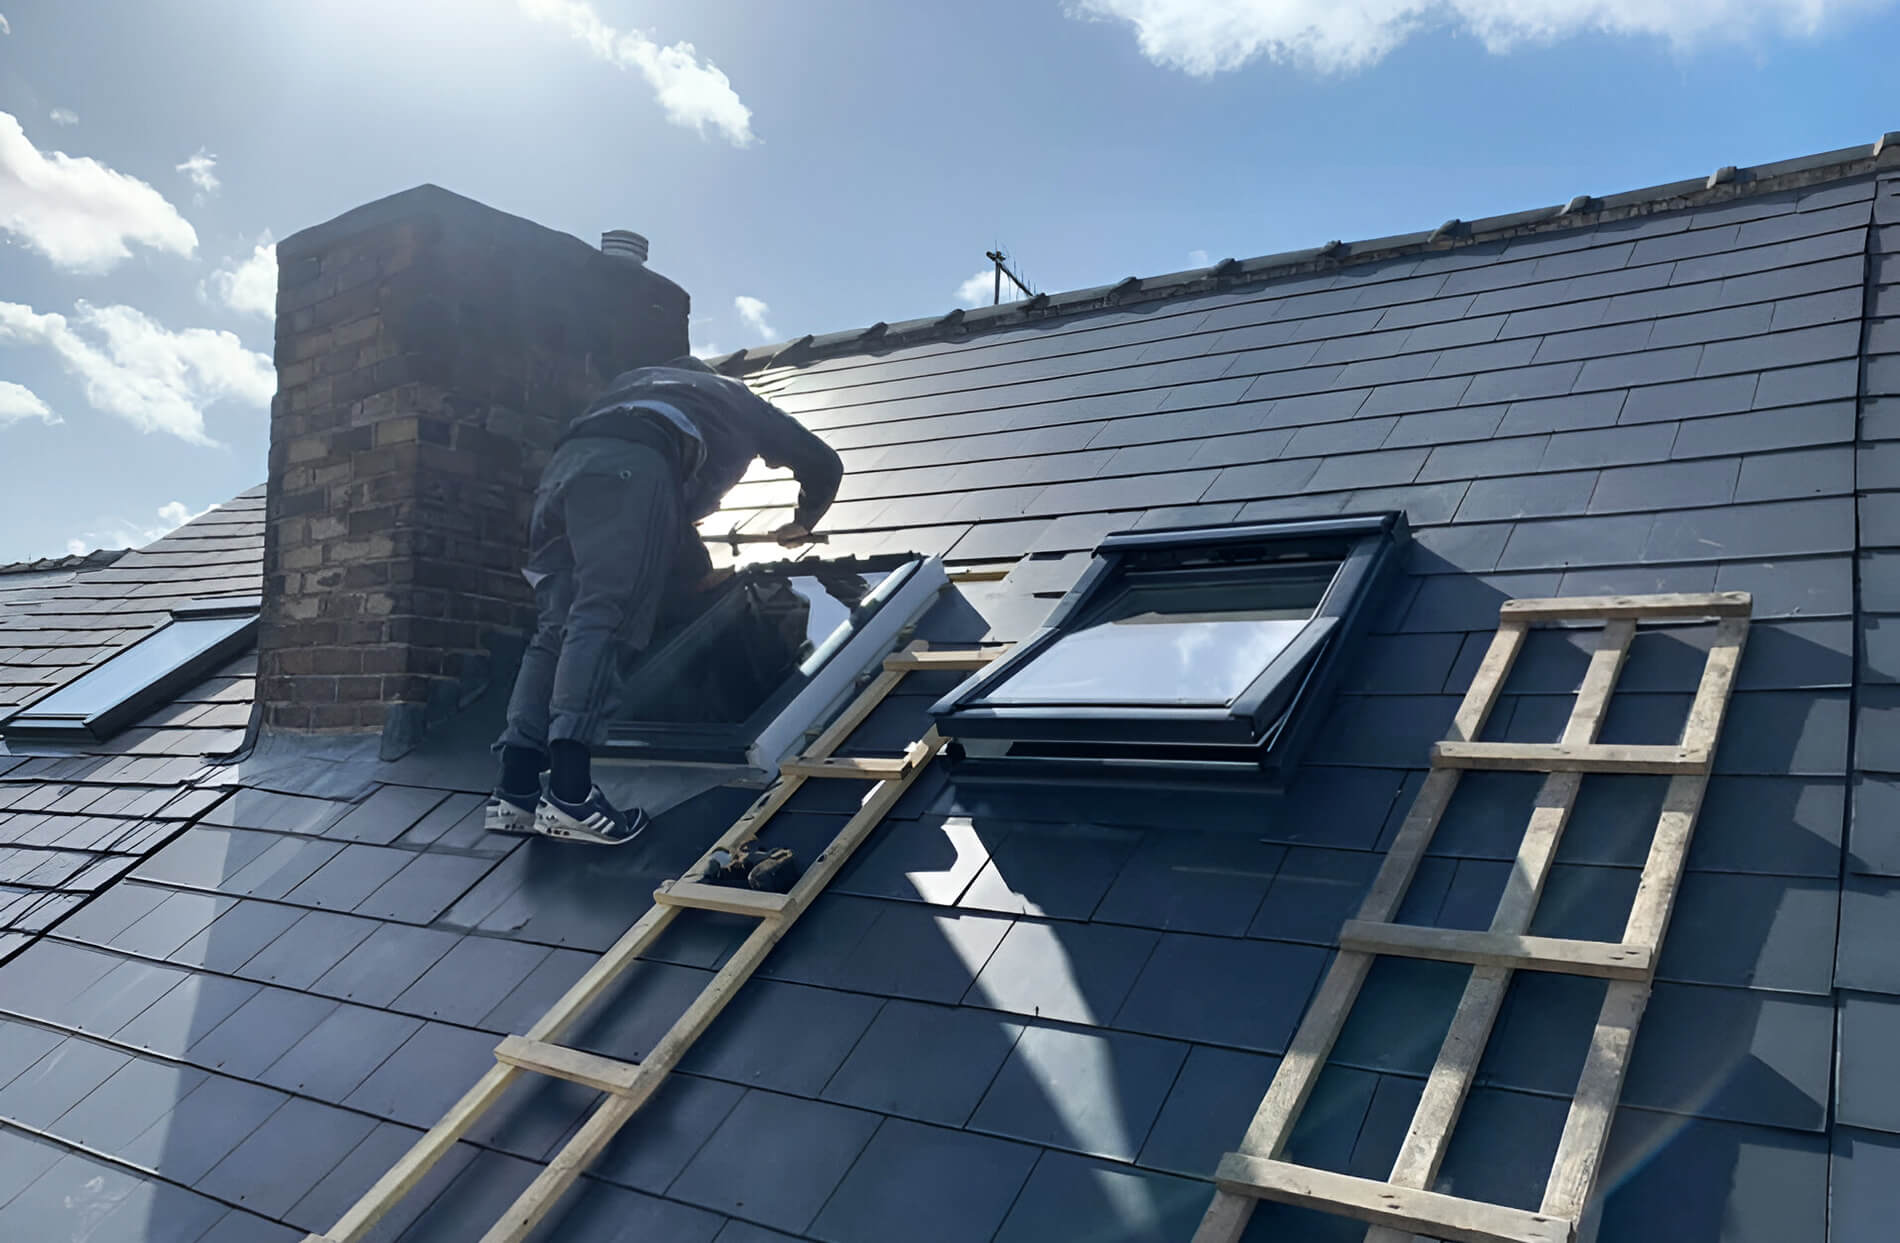 Inspecting your roof for damage and repair